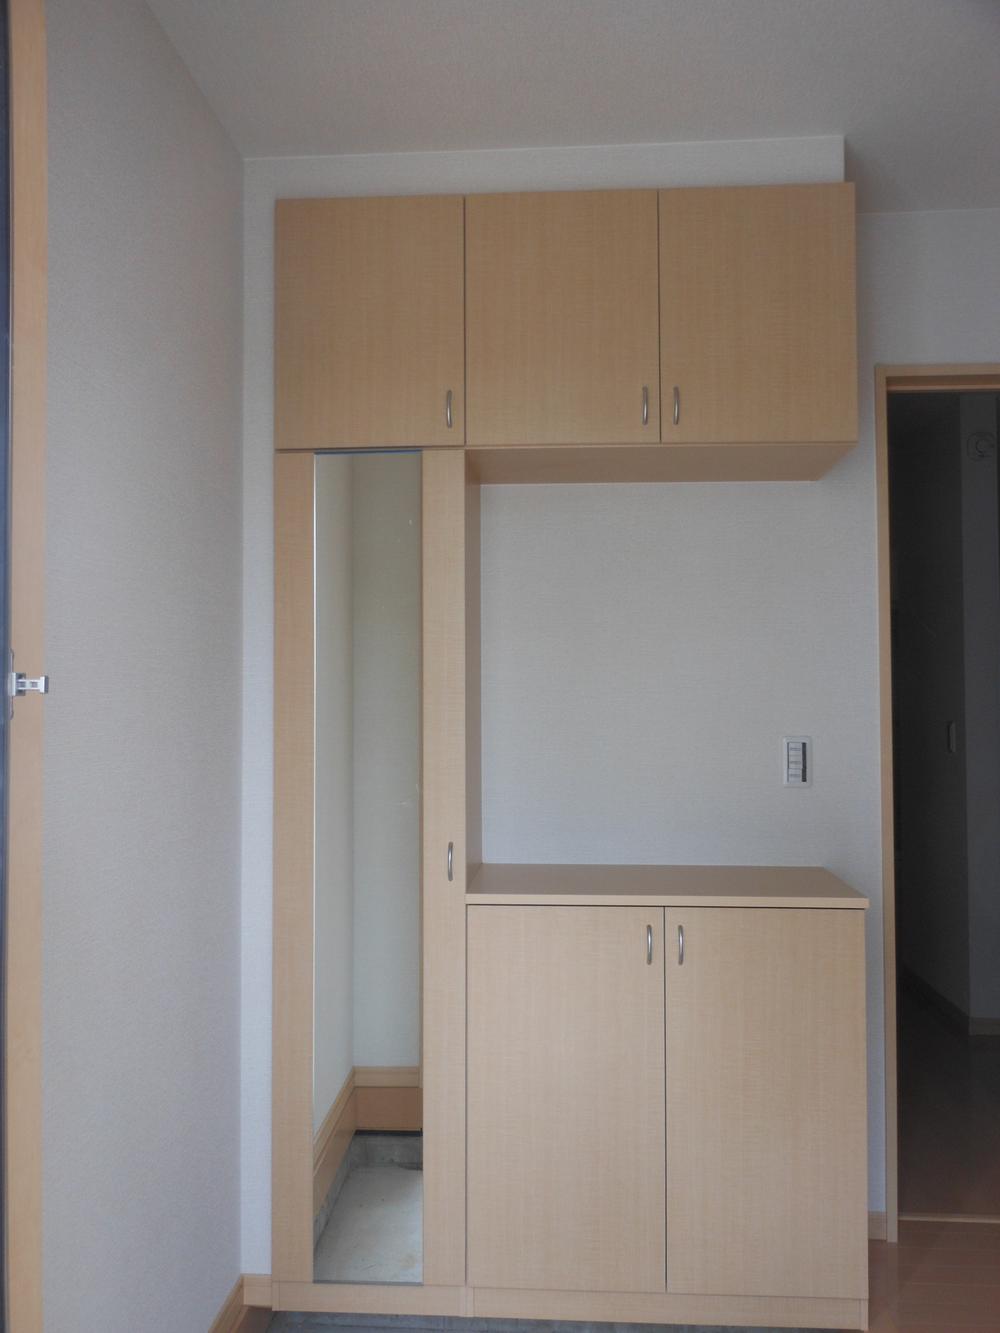 Same specifications photos (Other introspection). Cupboard Construction Example 3